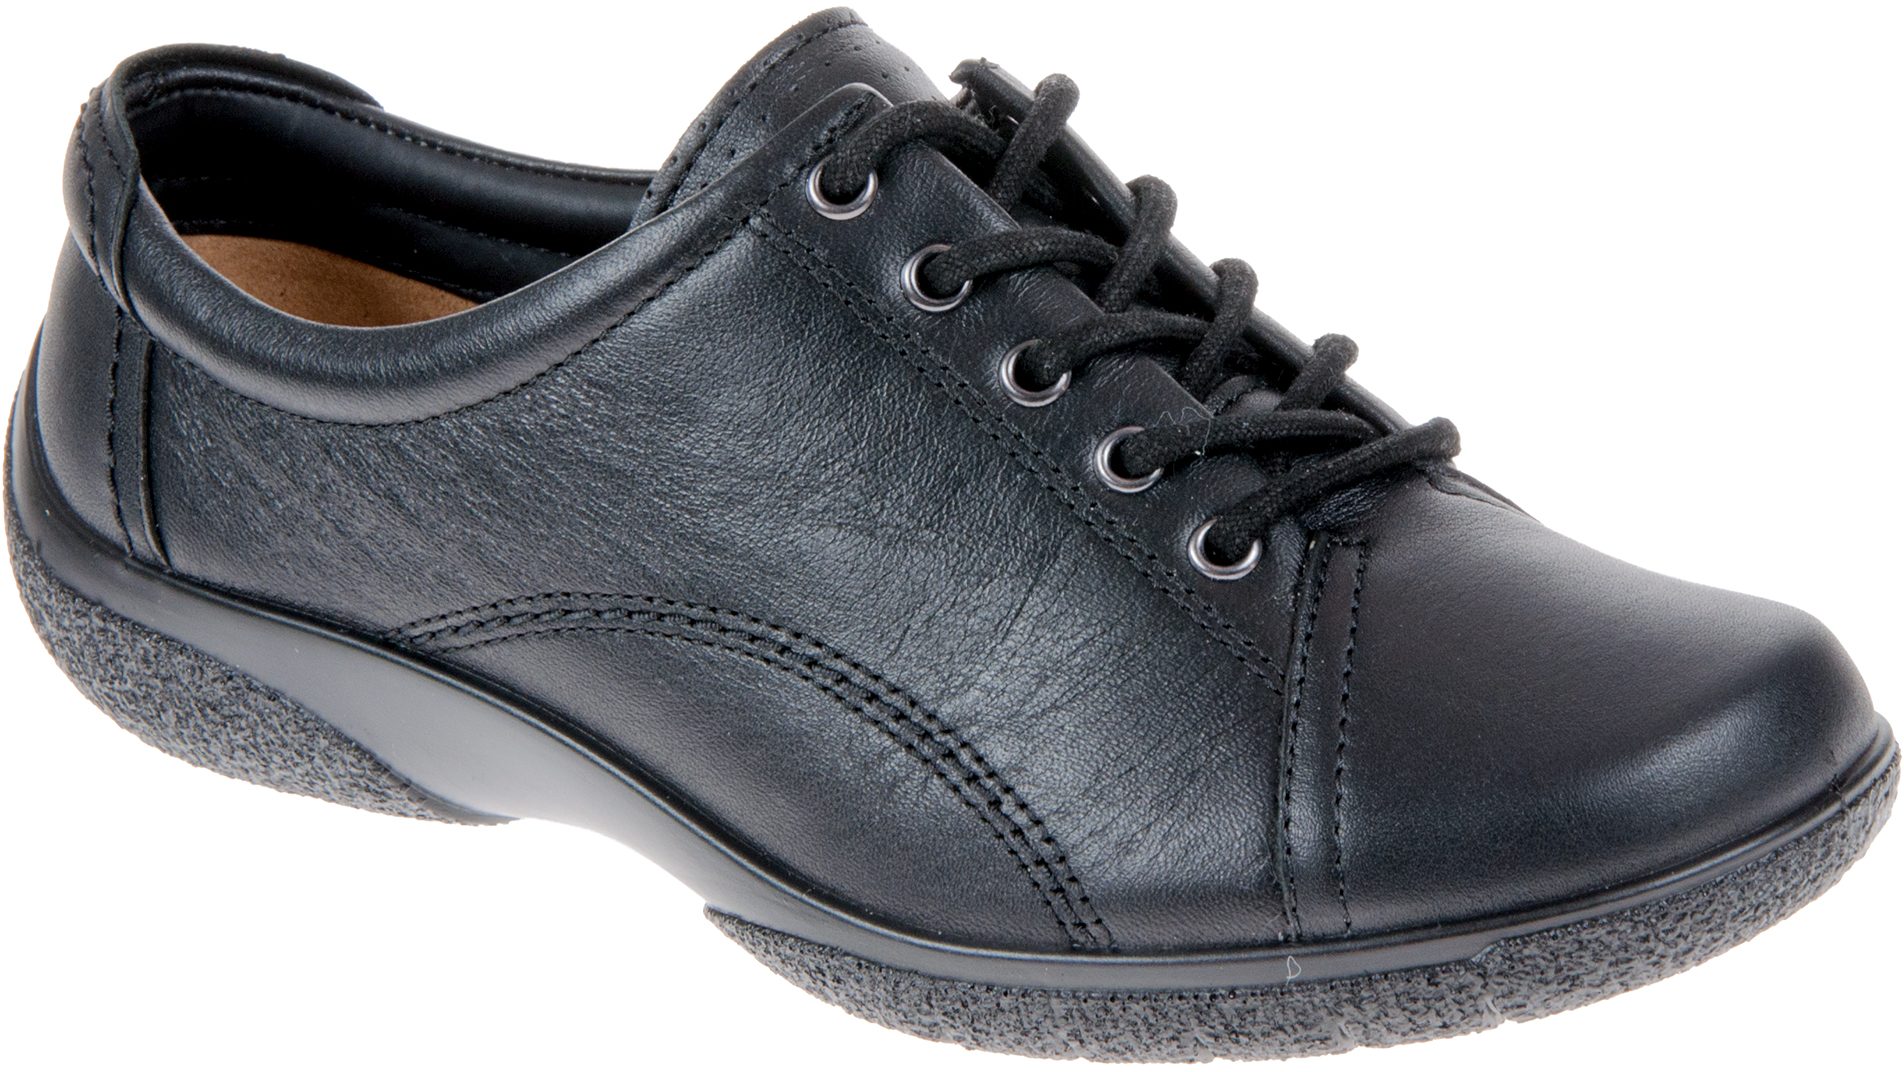 Hotter Dew Black Leather - Everyday Shoes - Humphries Shoes